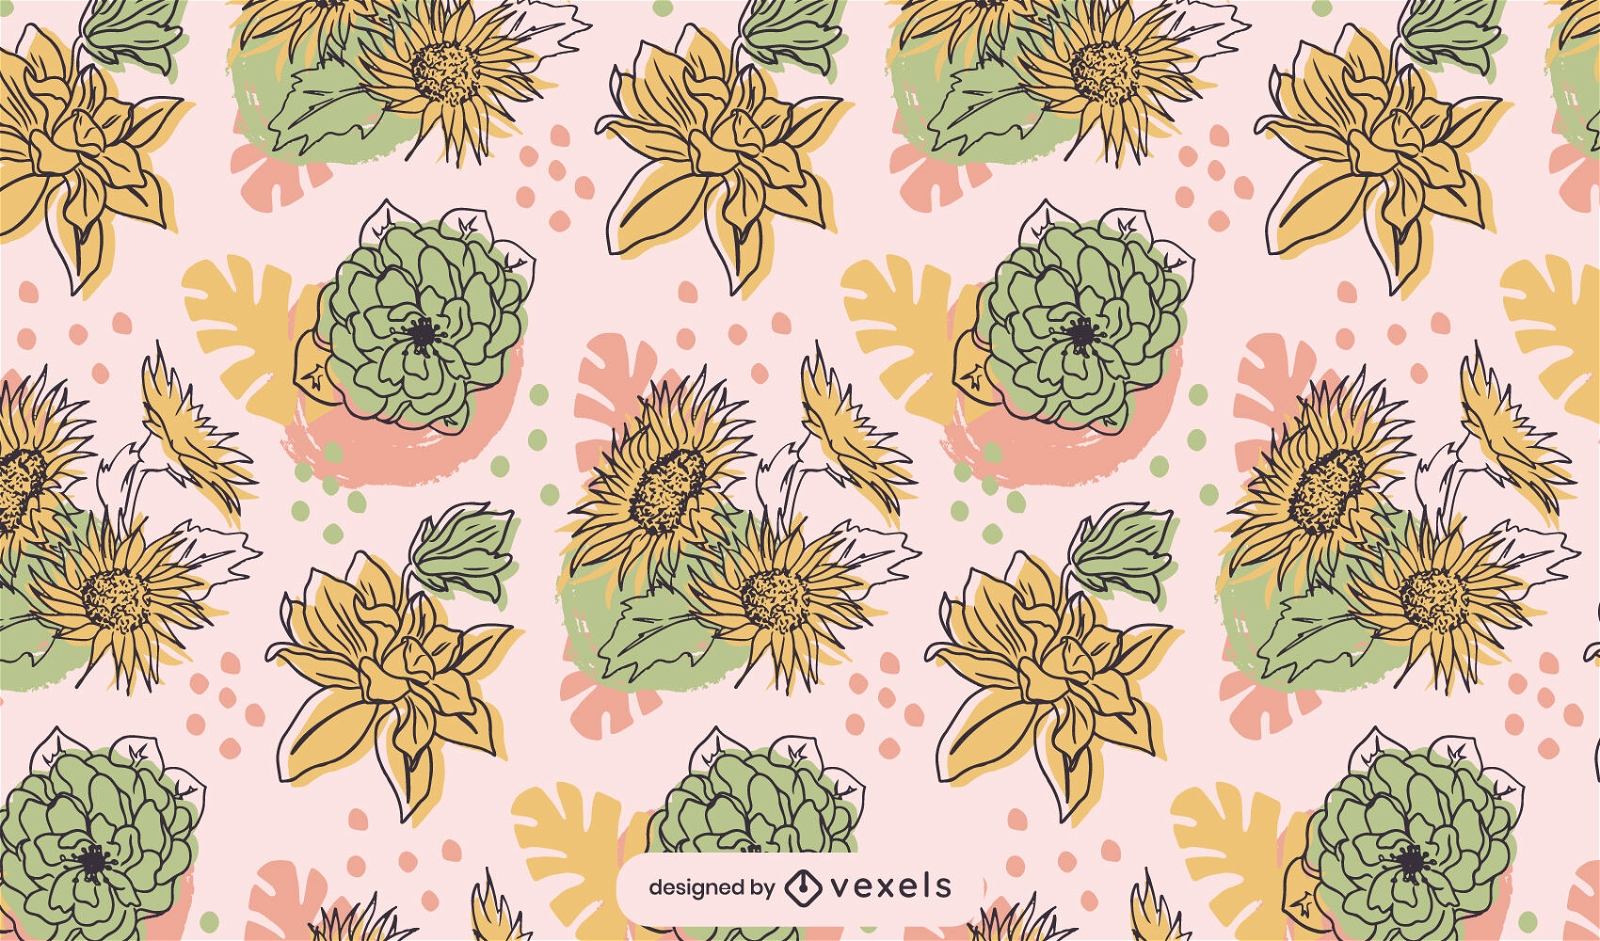 Organic abstract floral pattern design